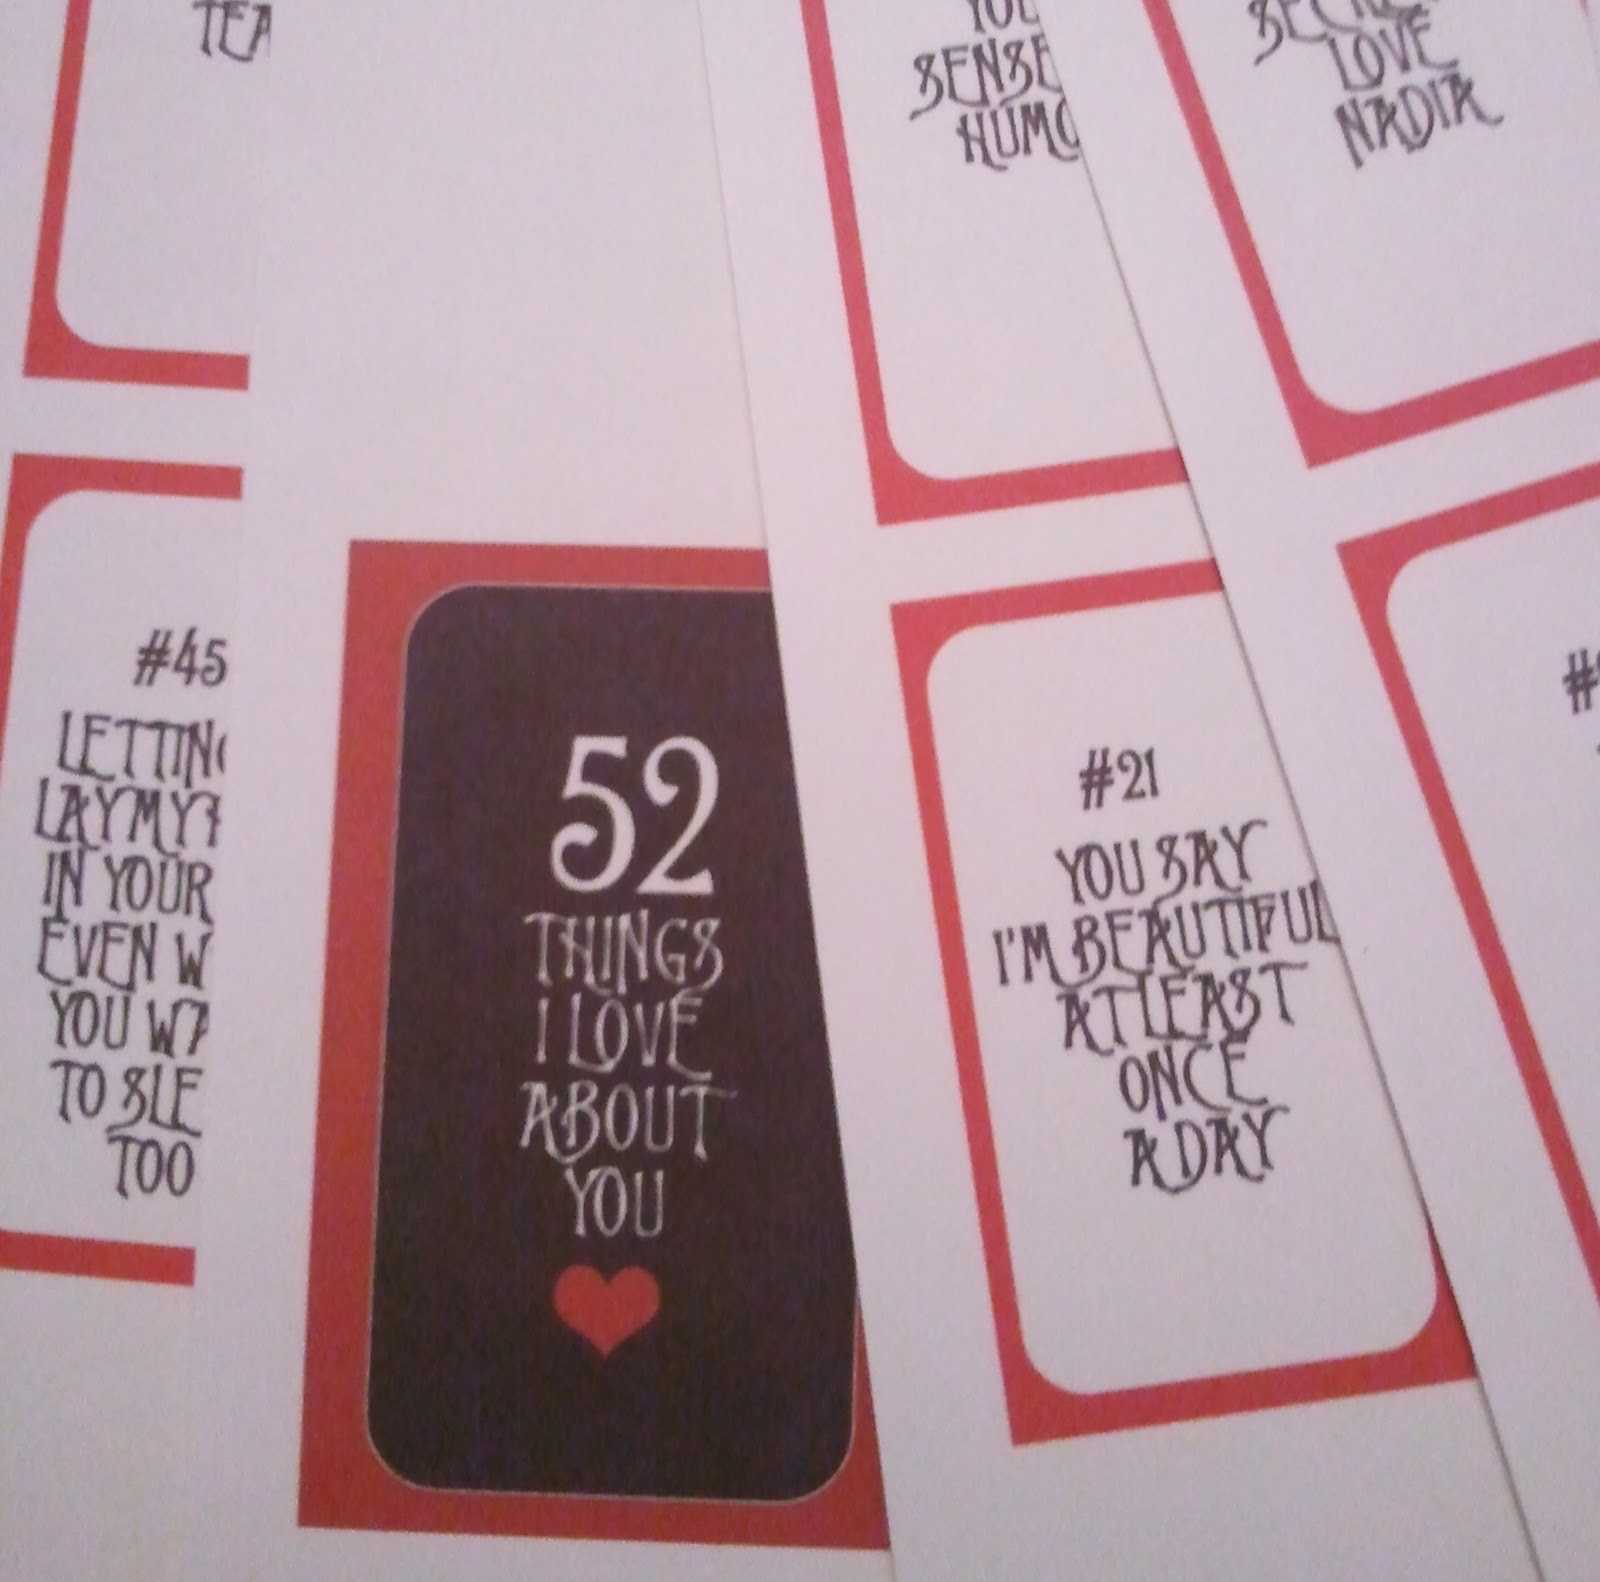 52 Reasons I Love You Template Free ] – 1000 Images About Throughout 52 Things I Love About You Deck Of Cards Template